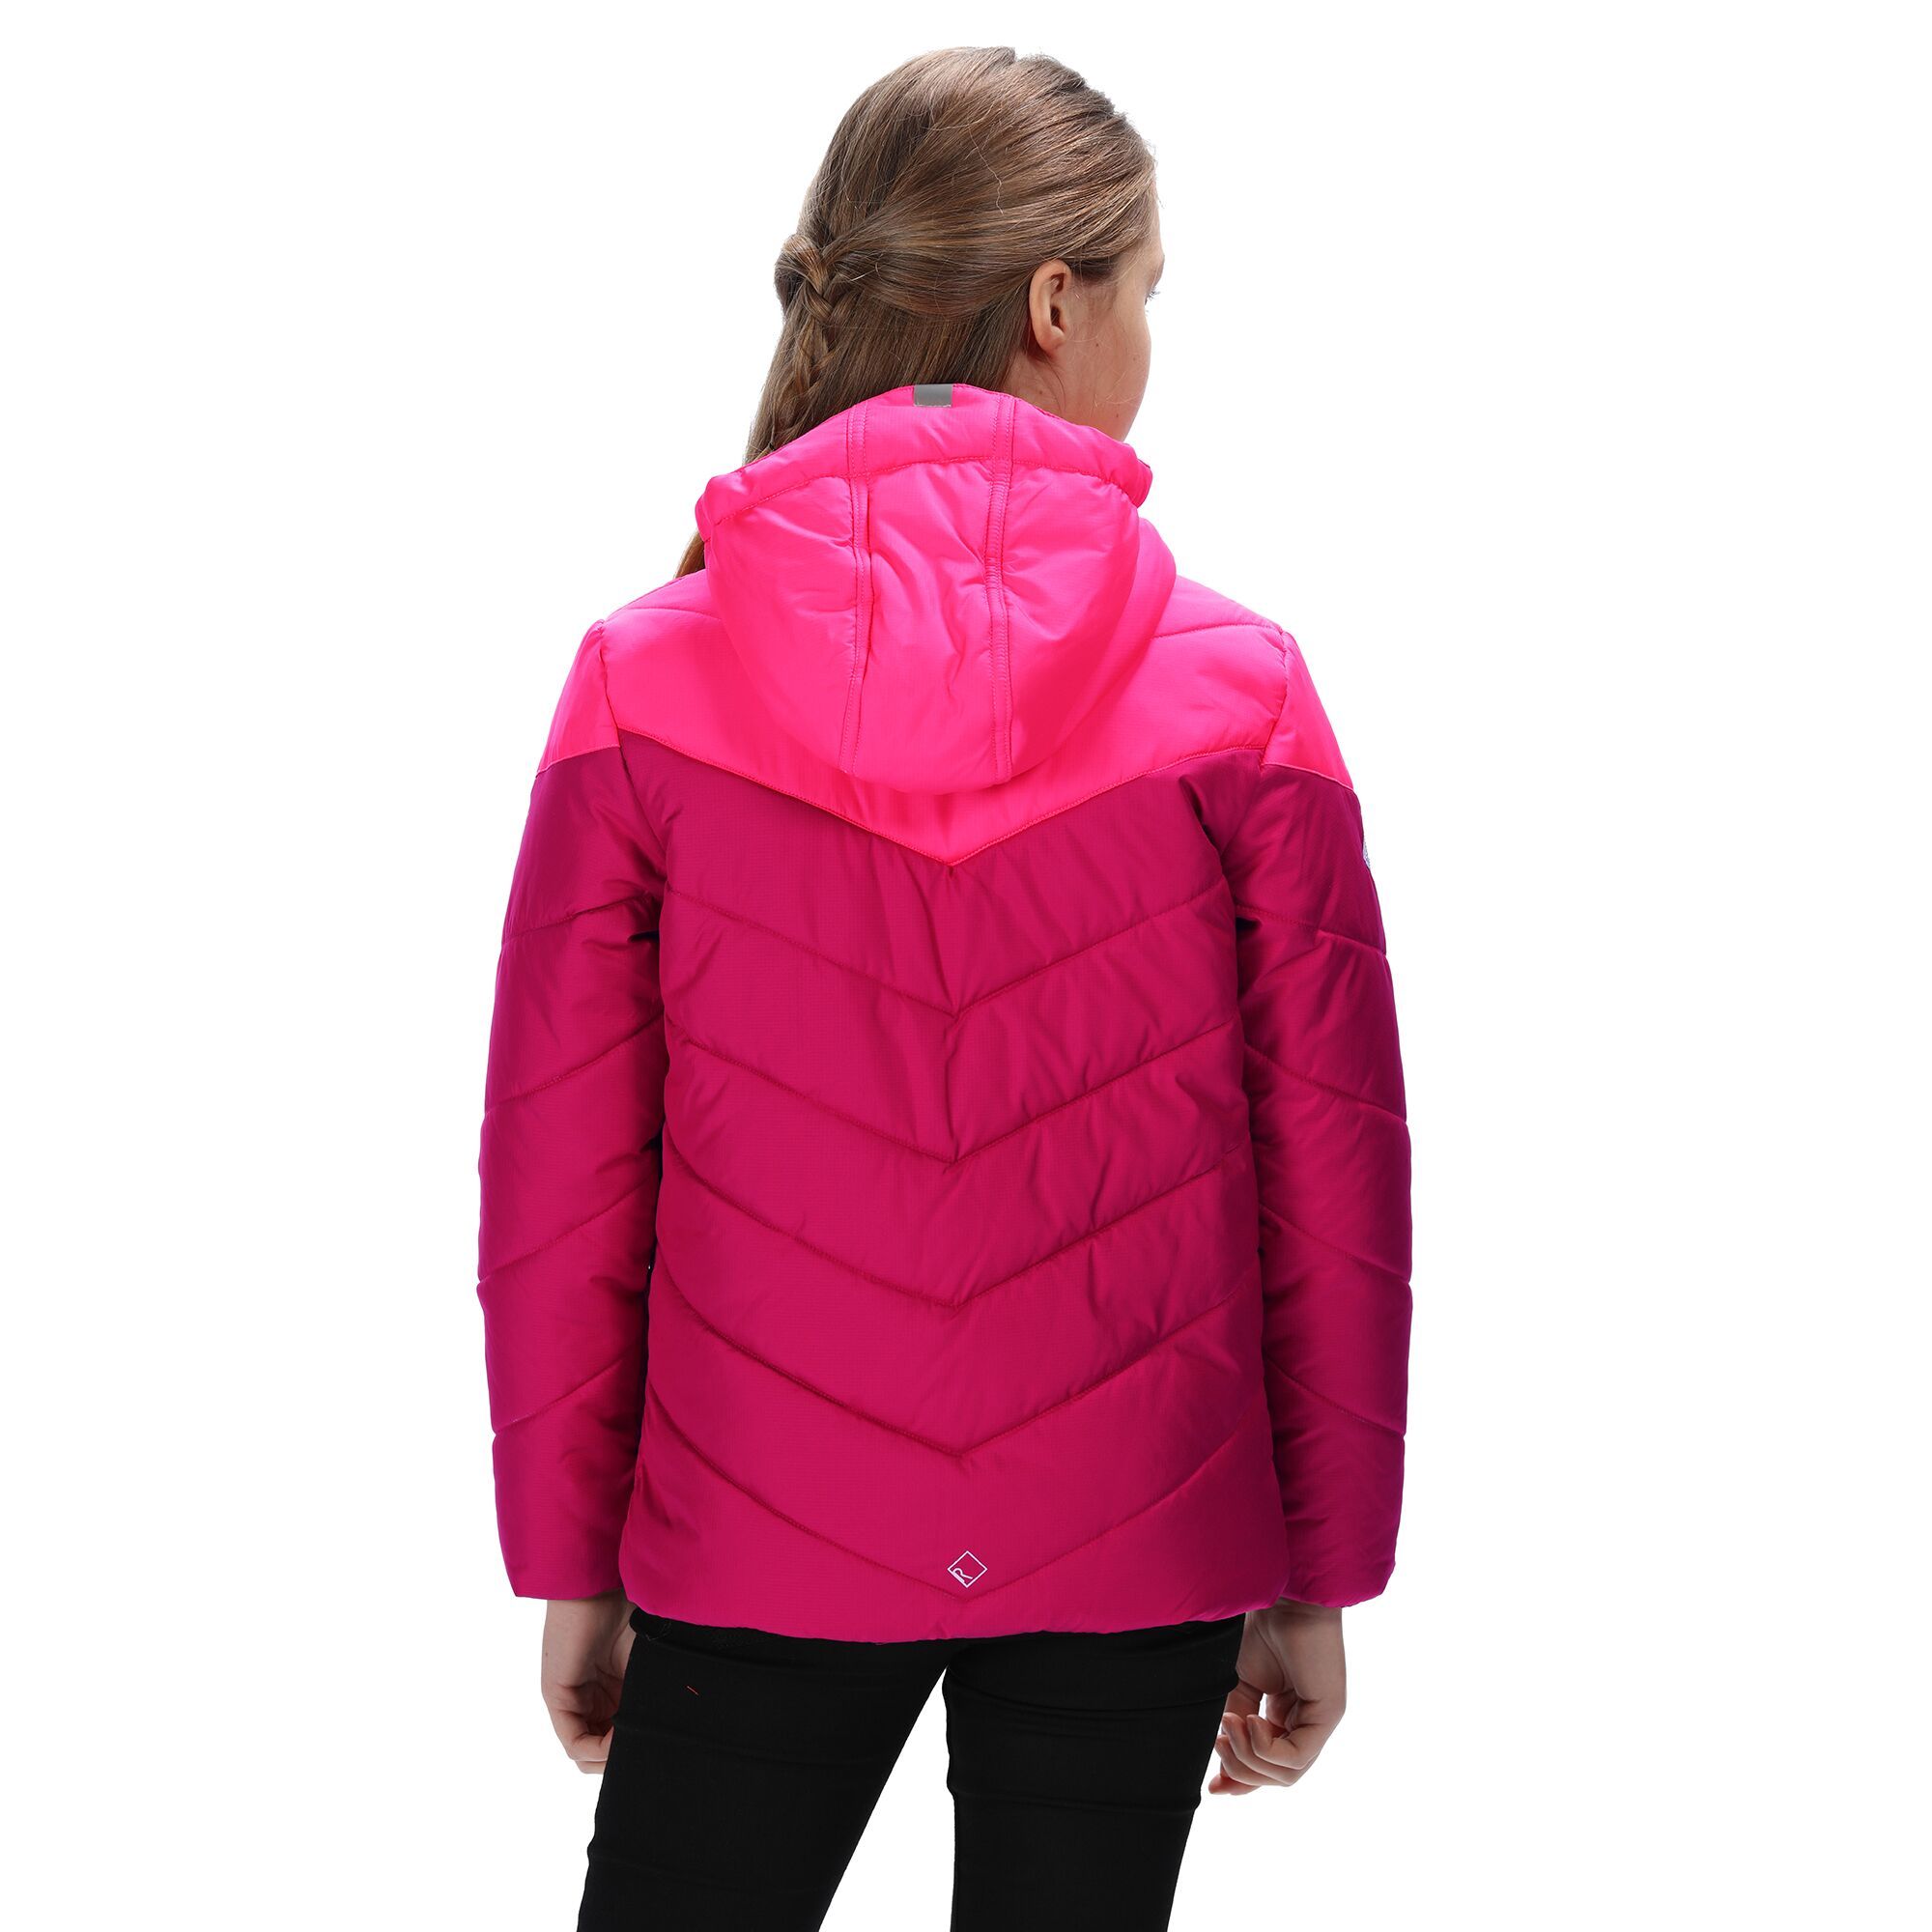 Material: 100% 75d polyester fabric. Durable water repellent finish. Thermo-Guard insulation. Heavyweight fill. Grown on hood. 2 zipped lower pockets. Elasticated cuffs and hem. Reflective trim. Signature R on the chest. Size (height/chest): (2 Years) 92cm/53-55cm, (3-4 Years) 98-104cm/55-57cm, (5-6 Years) 110-116cm/59-61cm, (7-8 Years) 122-128cm/63-67cm, (9-10 Years) 135-140cm/69-73cm, (11-12 Years) 146-152cm/75-79cm, (13 Years) 153-158cm/82cm, (14 Years) 164-170cm/86cm, (15-16 Years) 170-176cm/89-92cm.